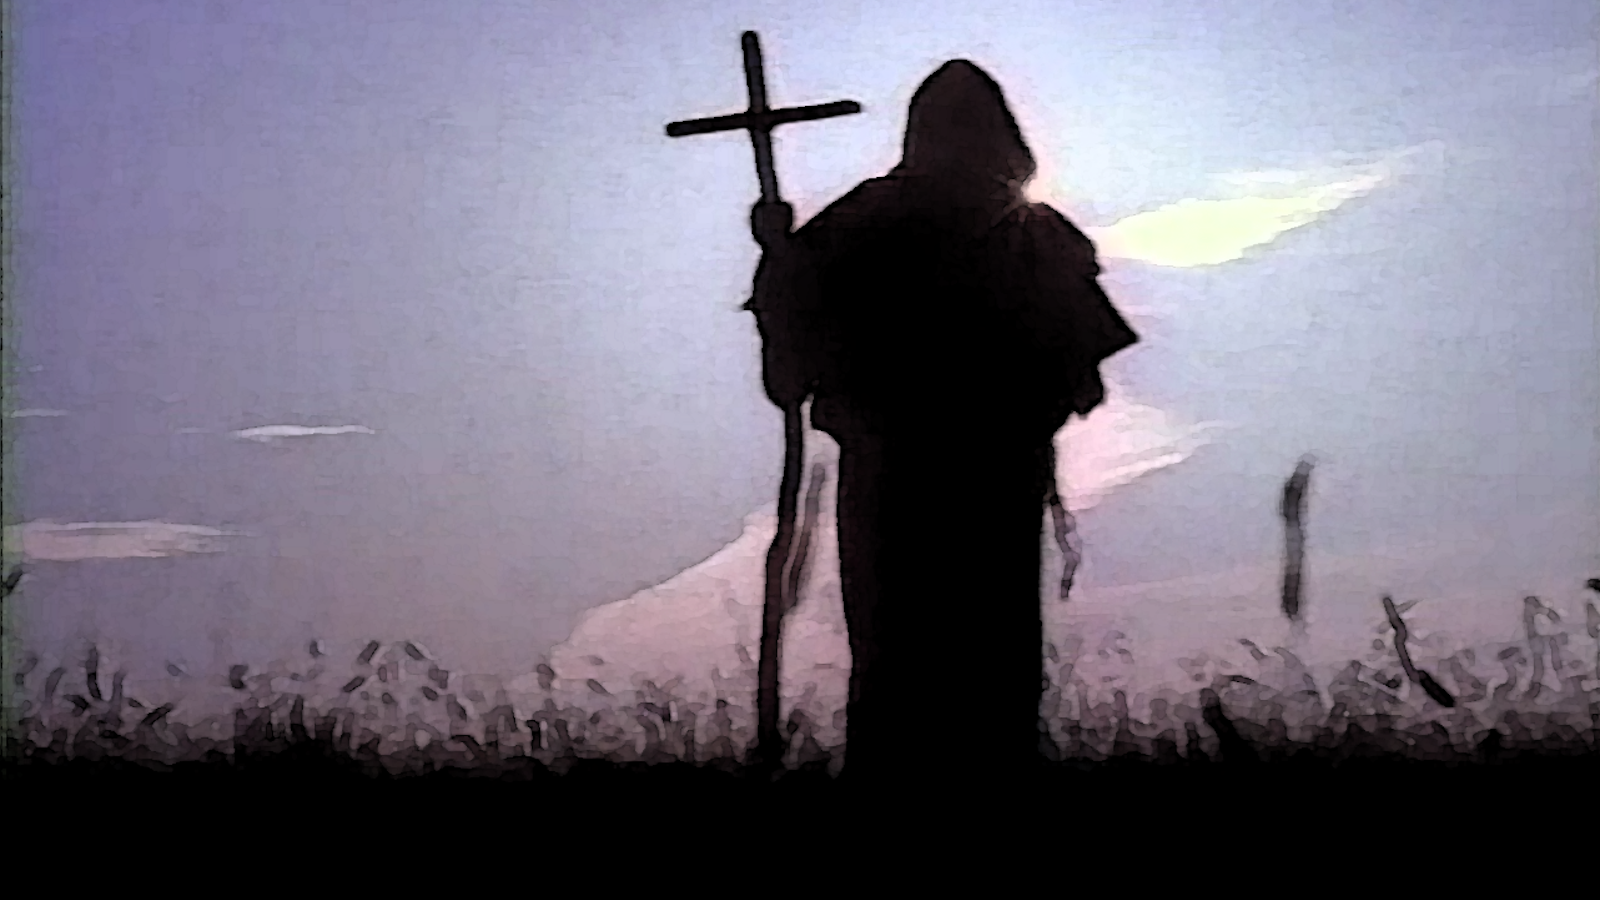 Silhouette of a person wearing a priest's robe standing in a field of tall grasses, holding a cross.